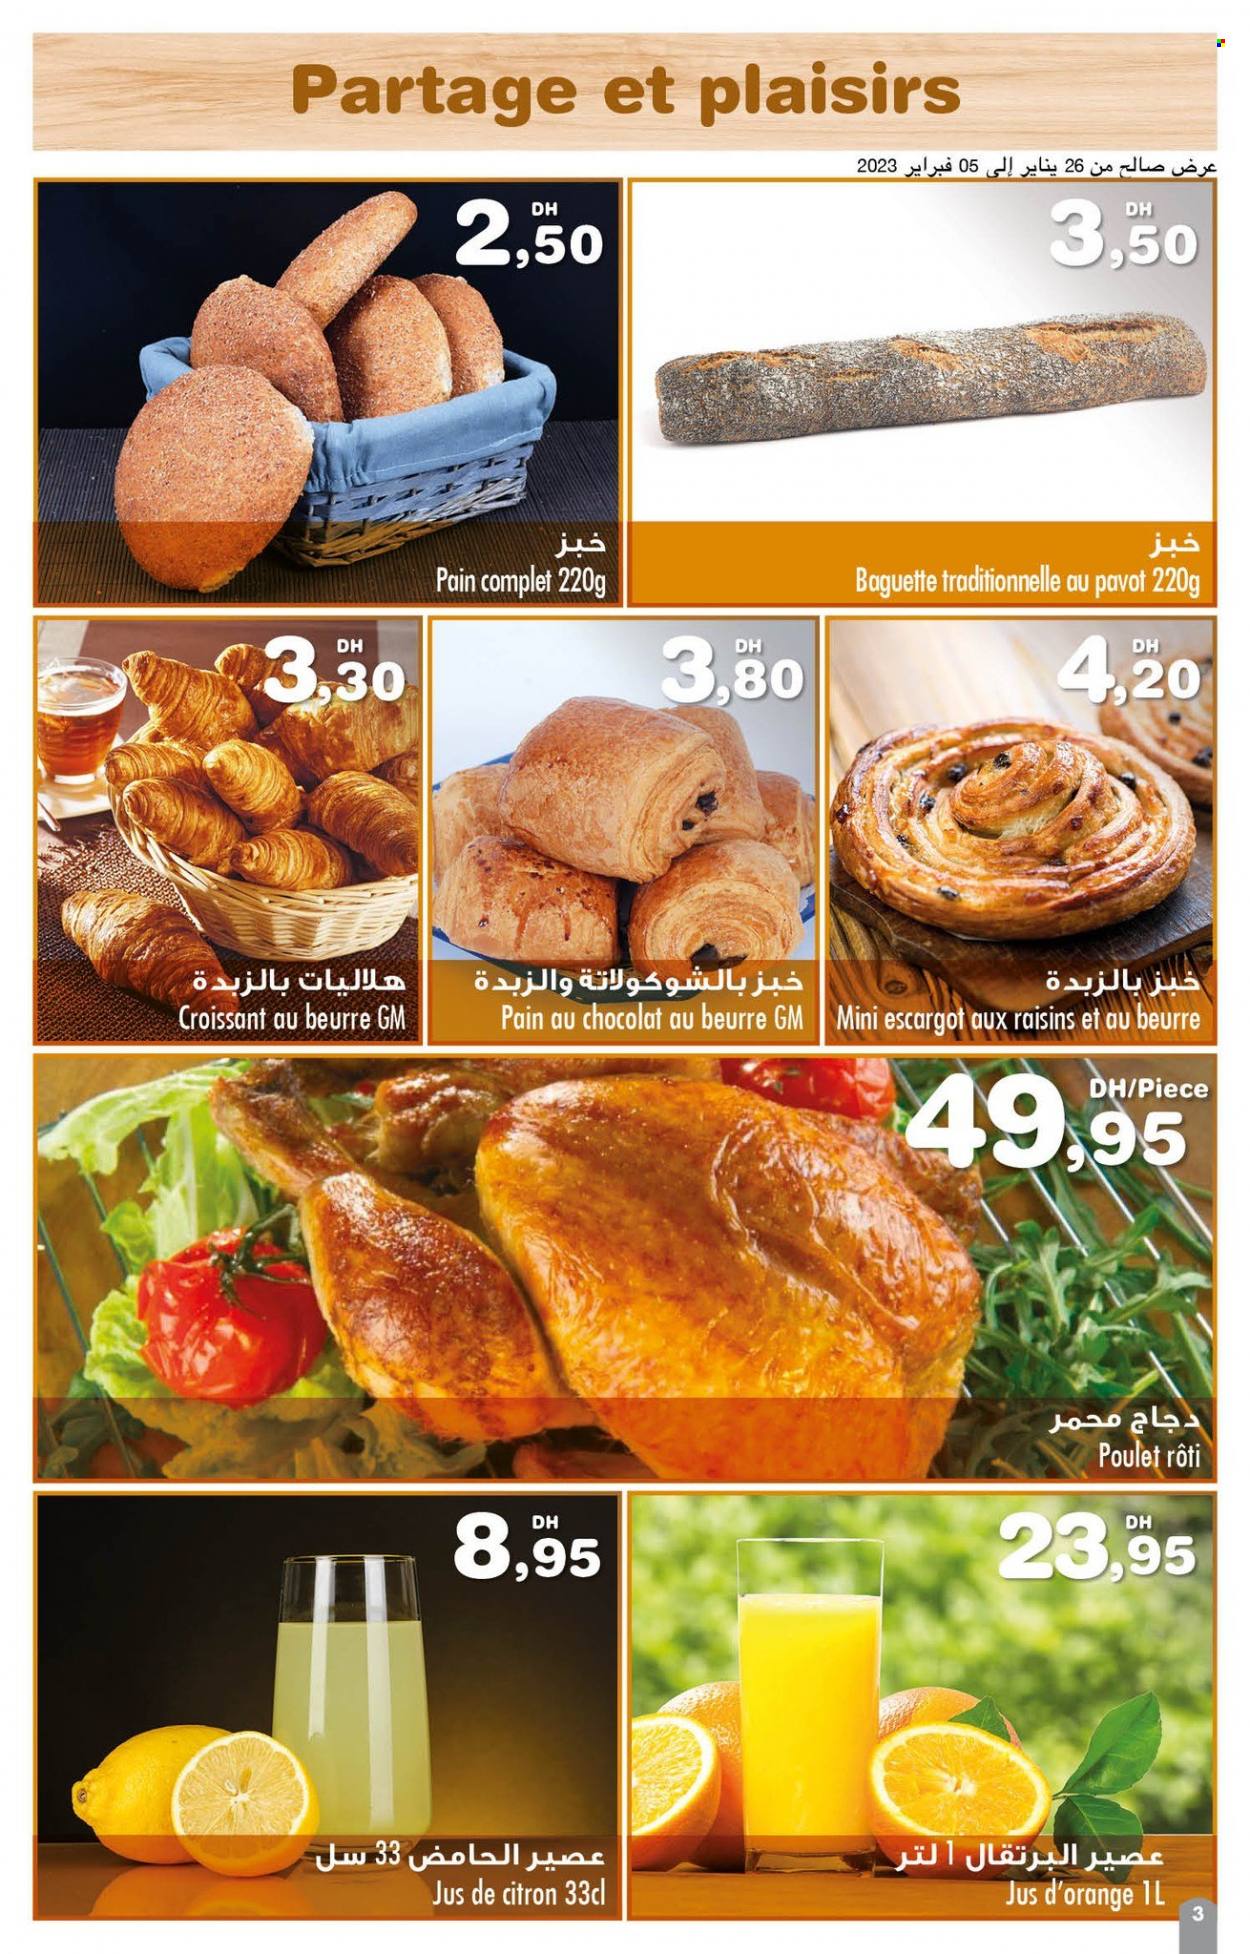 Catalogue Carrefour Express - 26/01/2023 - 15/02/2023. Page 3.